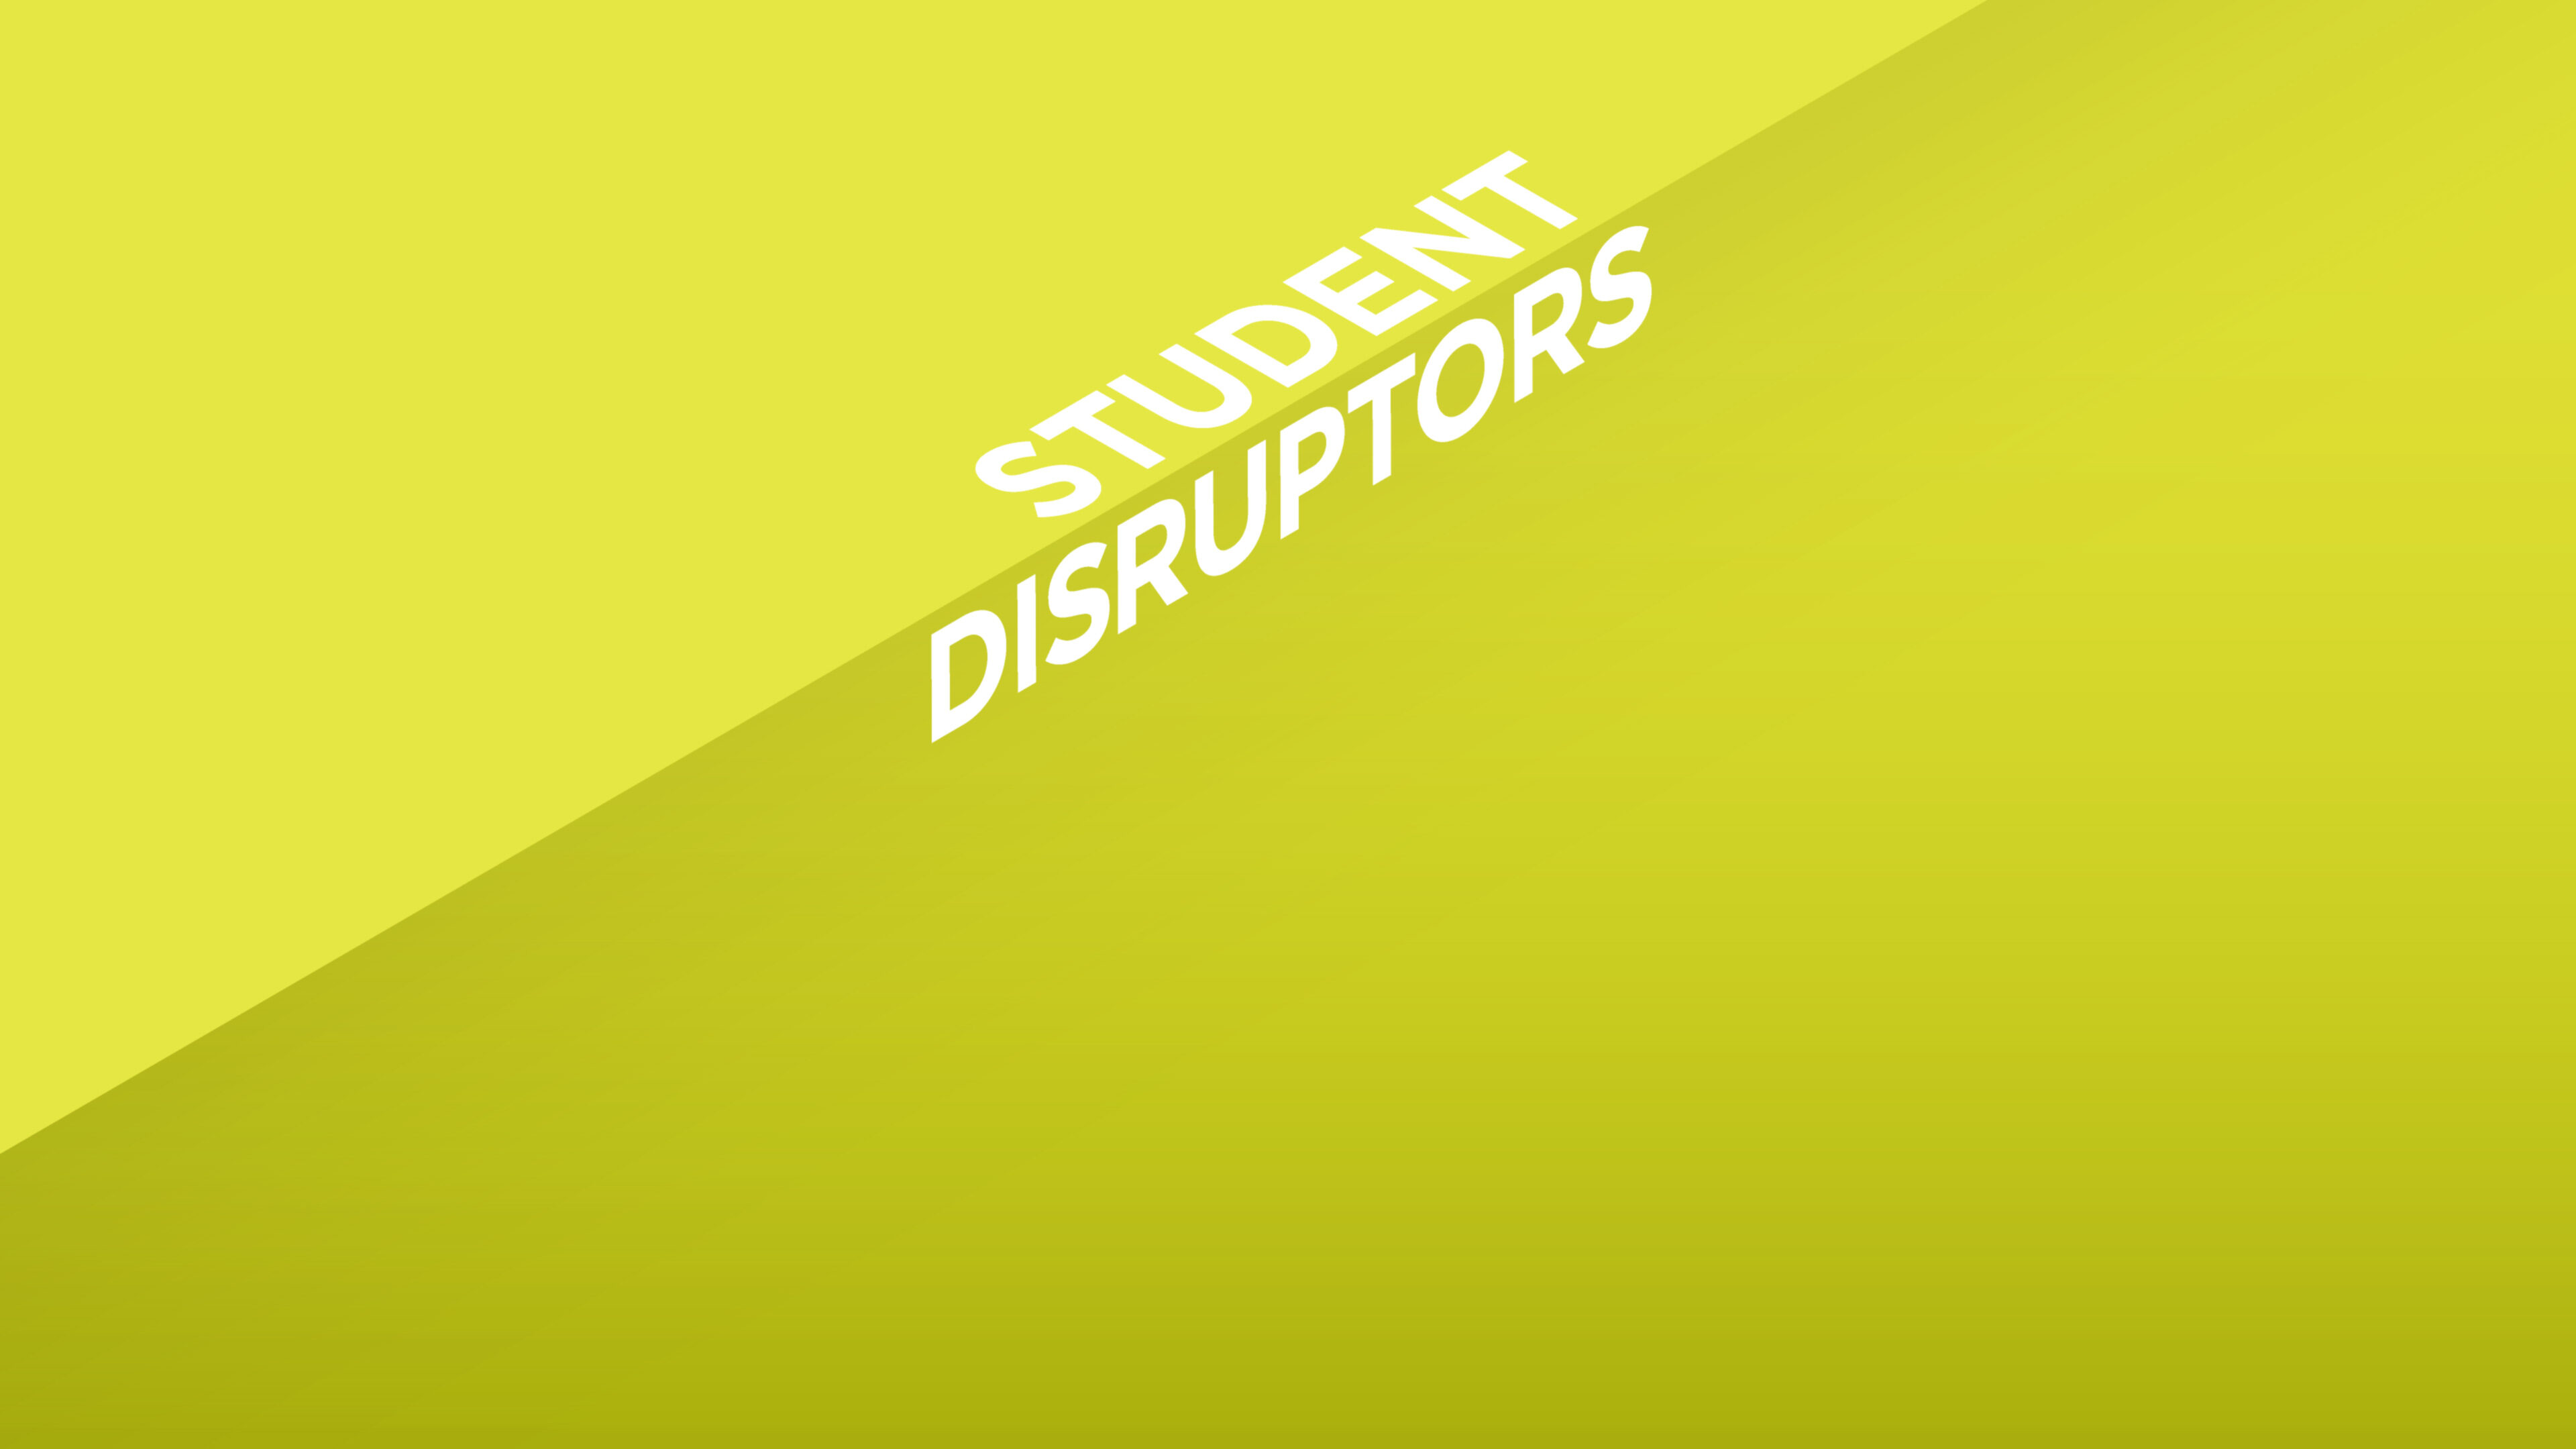 The words "Student Disruptors" are rendered in uppercase sans serif font and rendered at a dimensional angle as artwork.